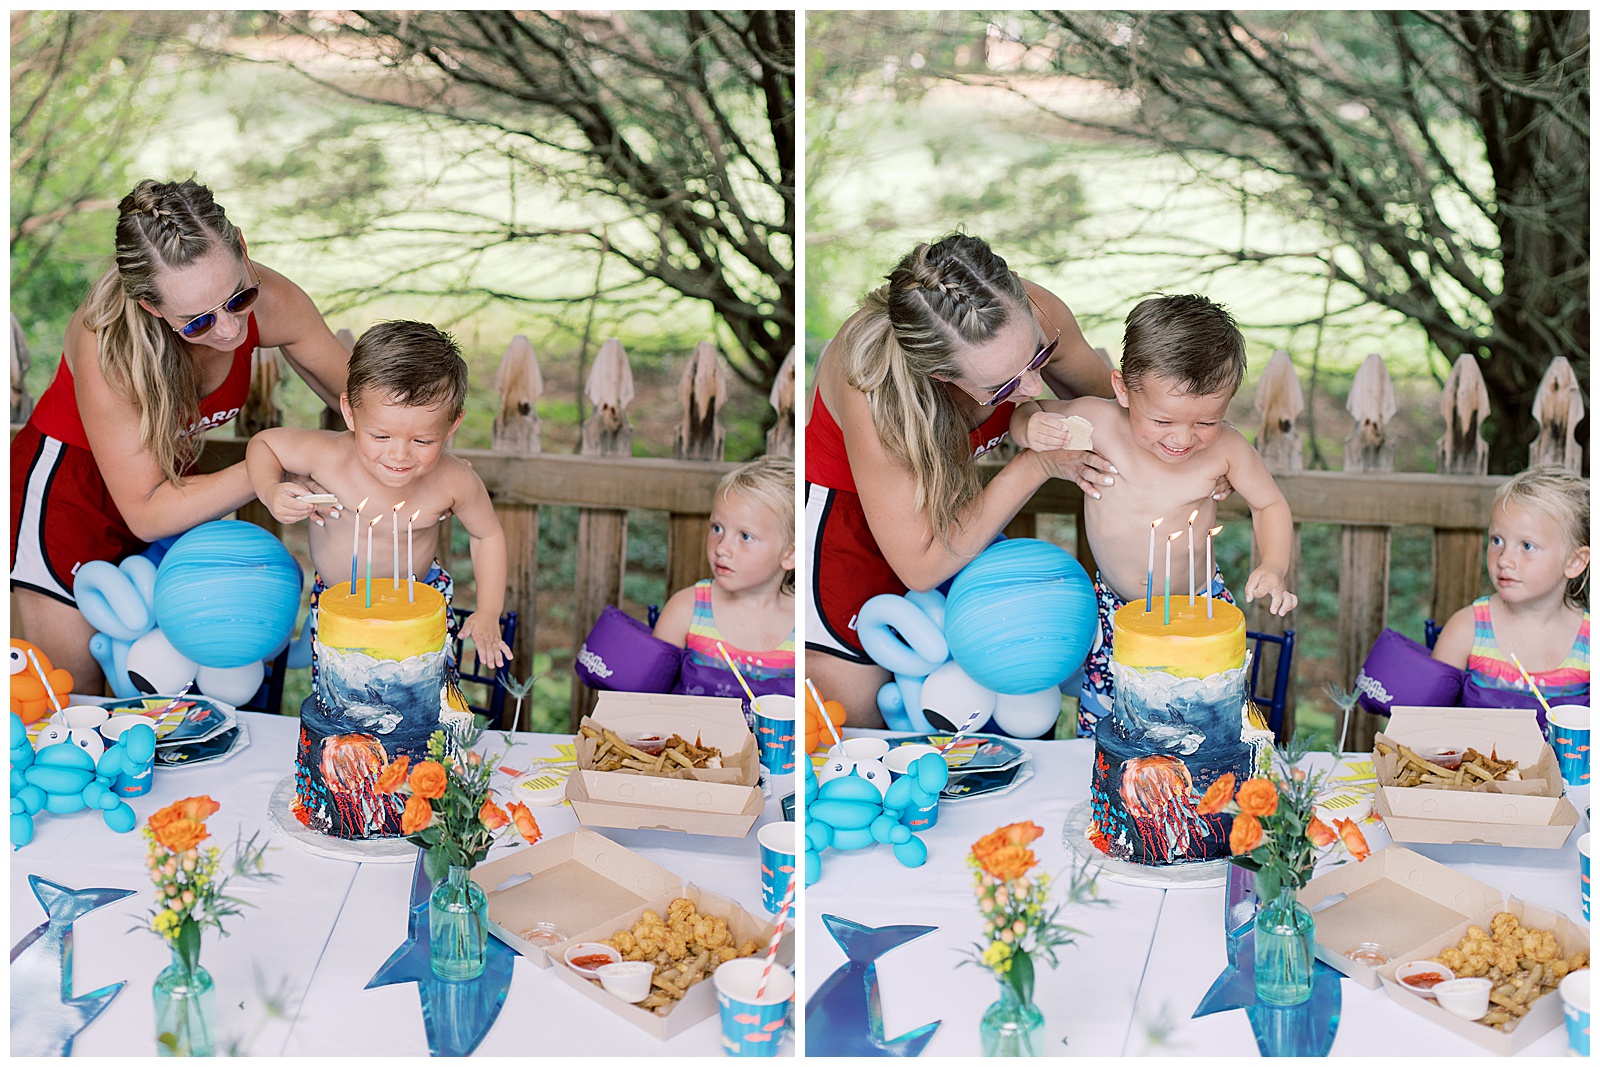 Under the Sea Birthday Party